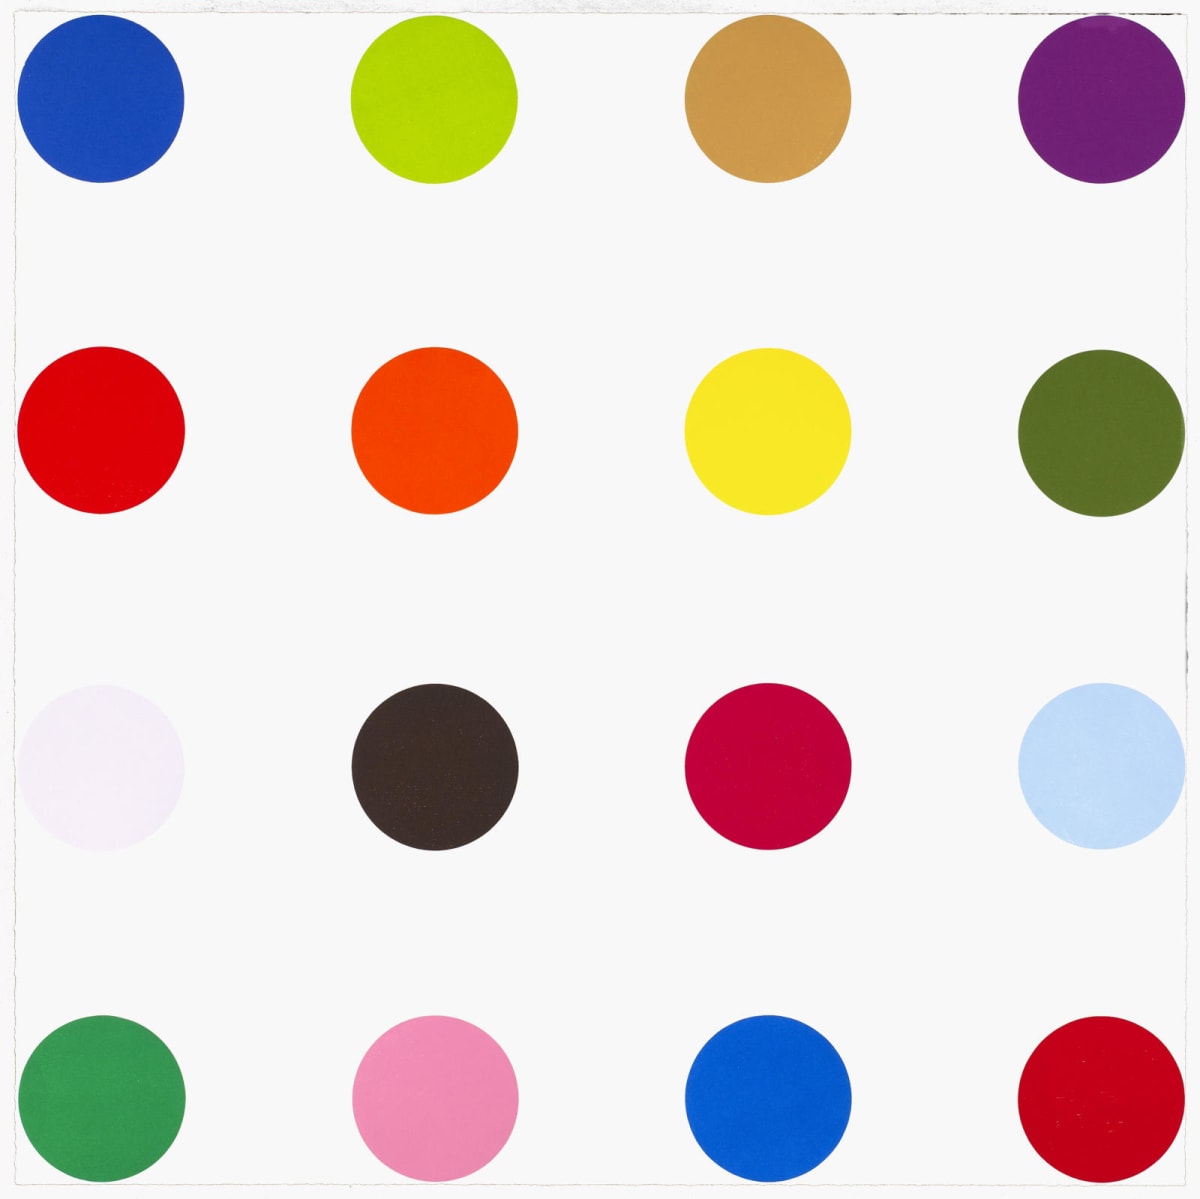 Damien Hirst, Cocarboxylase, 2010